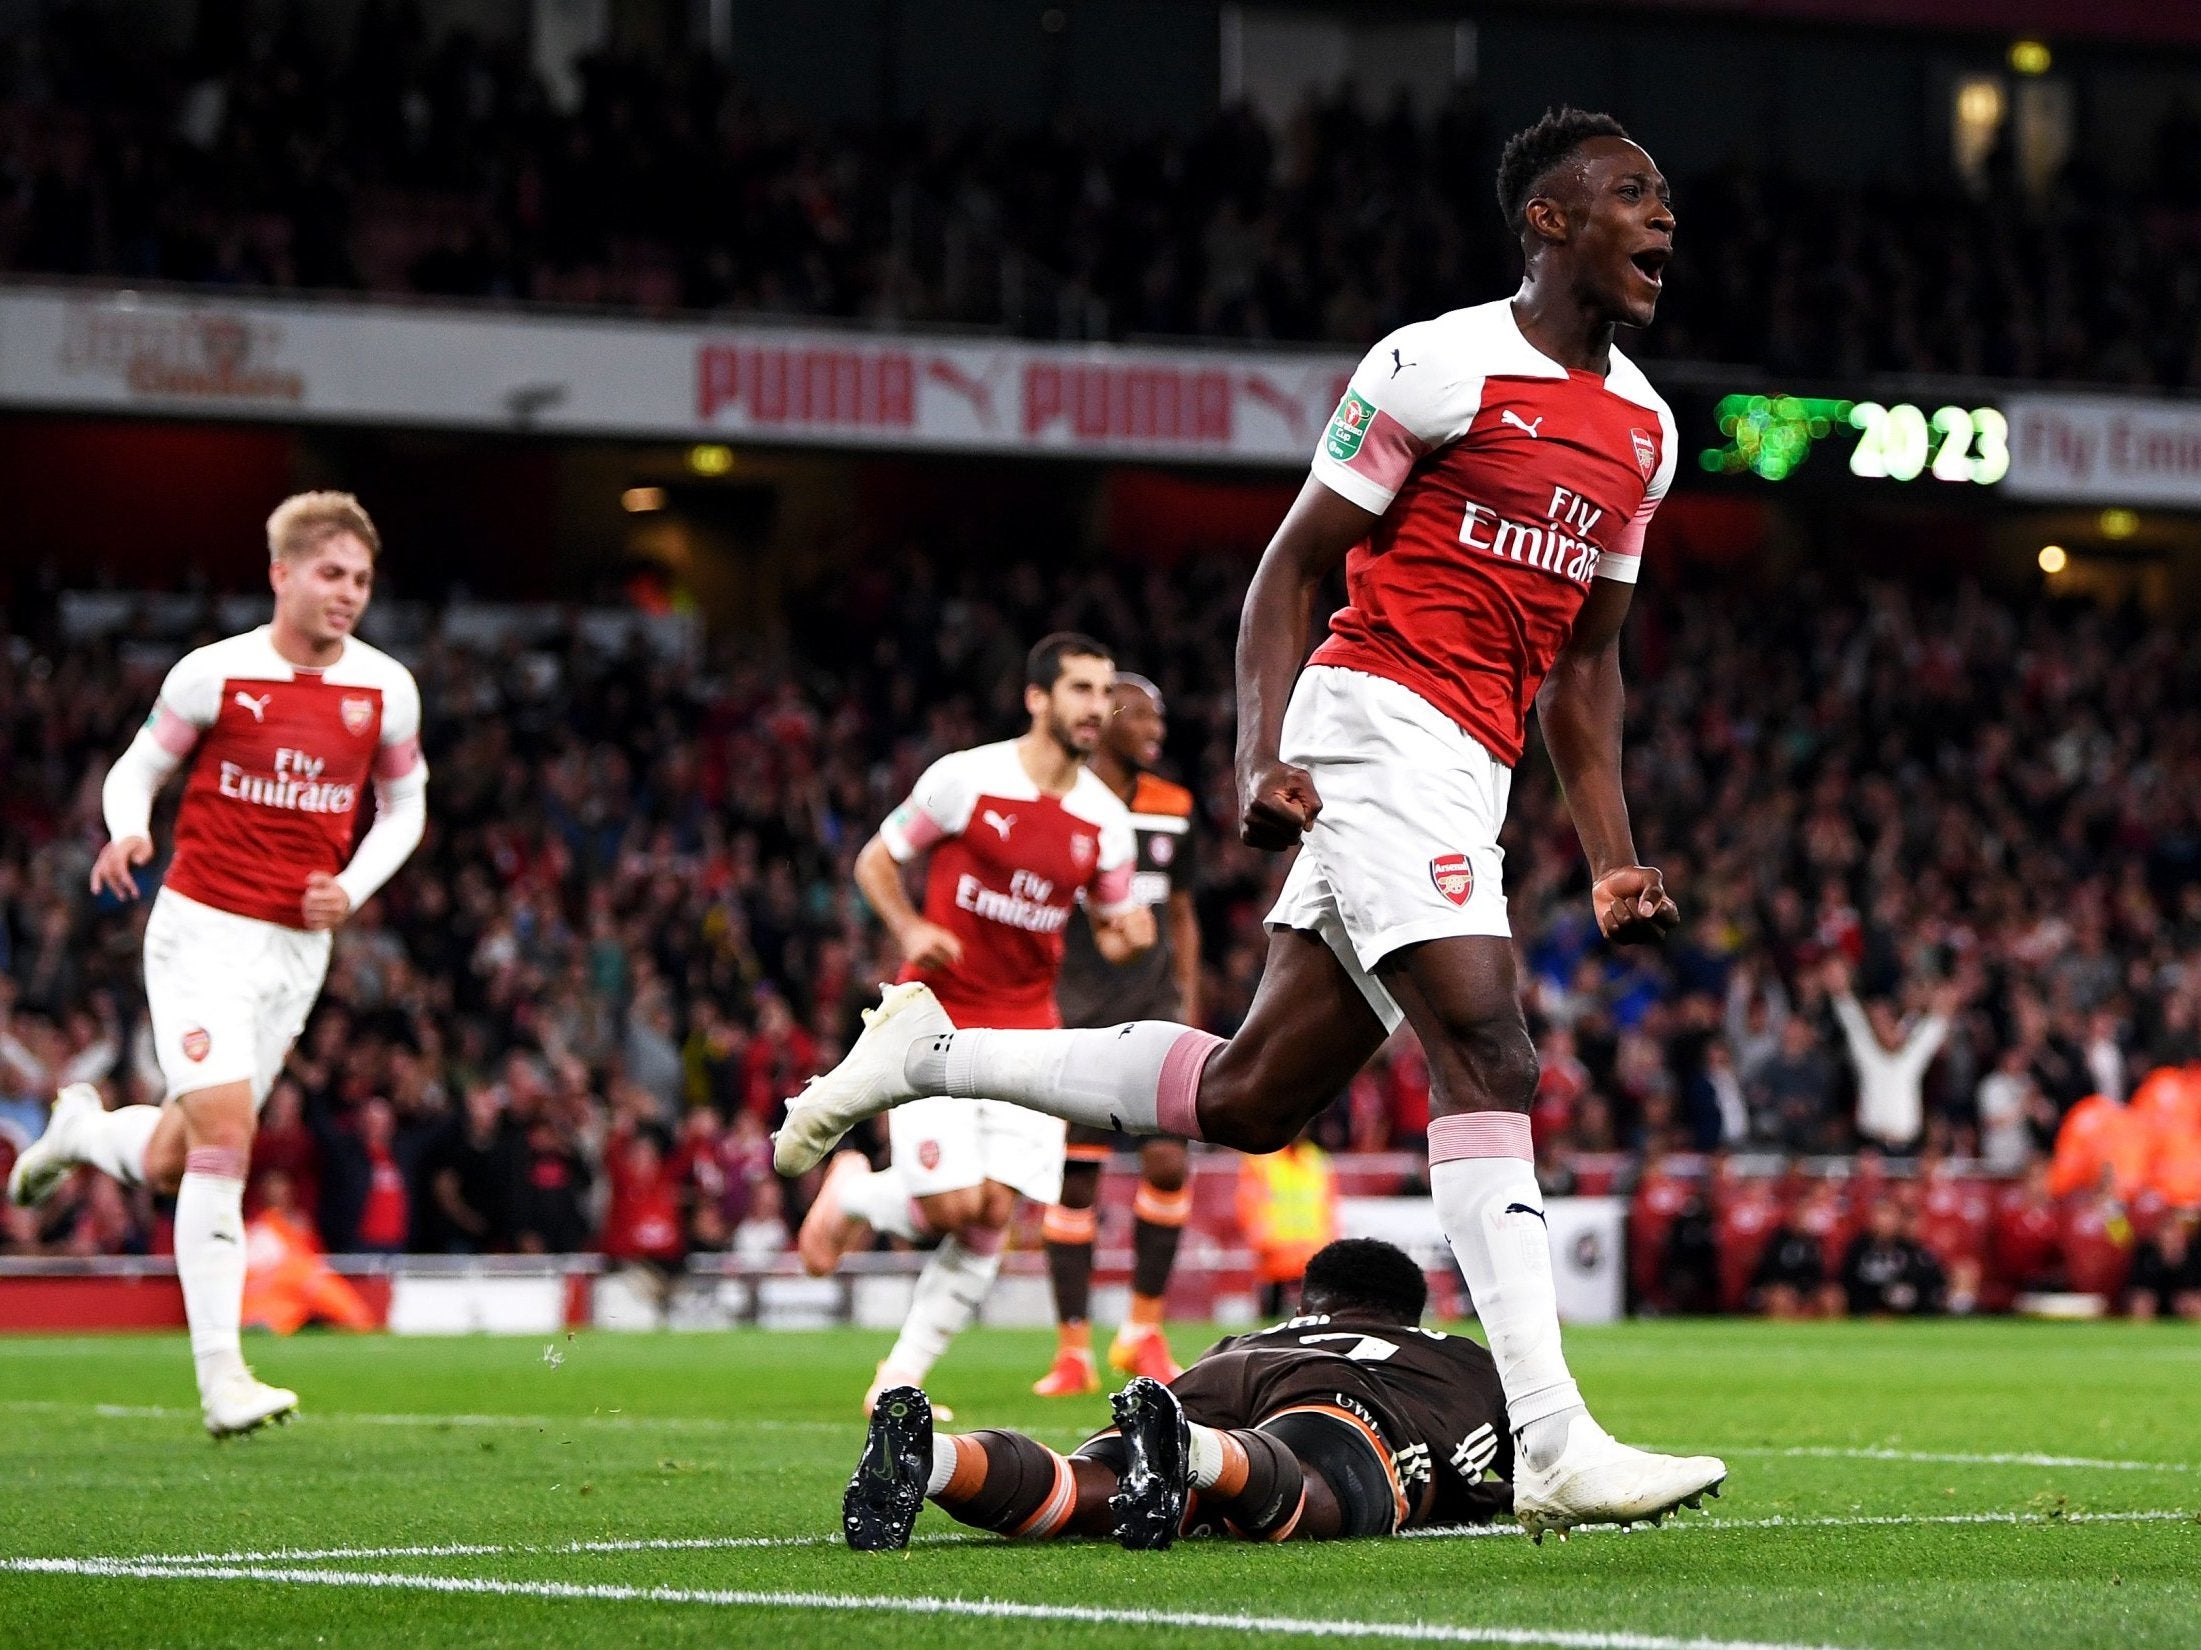 Danny Welbeck has made his claim for a place in the first team